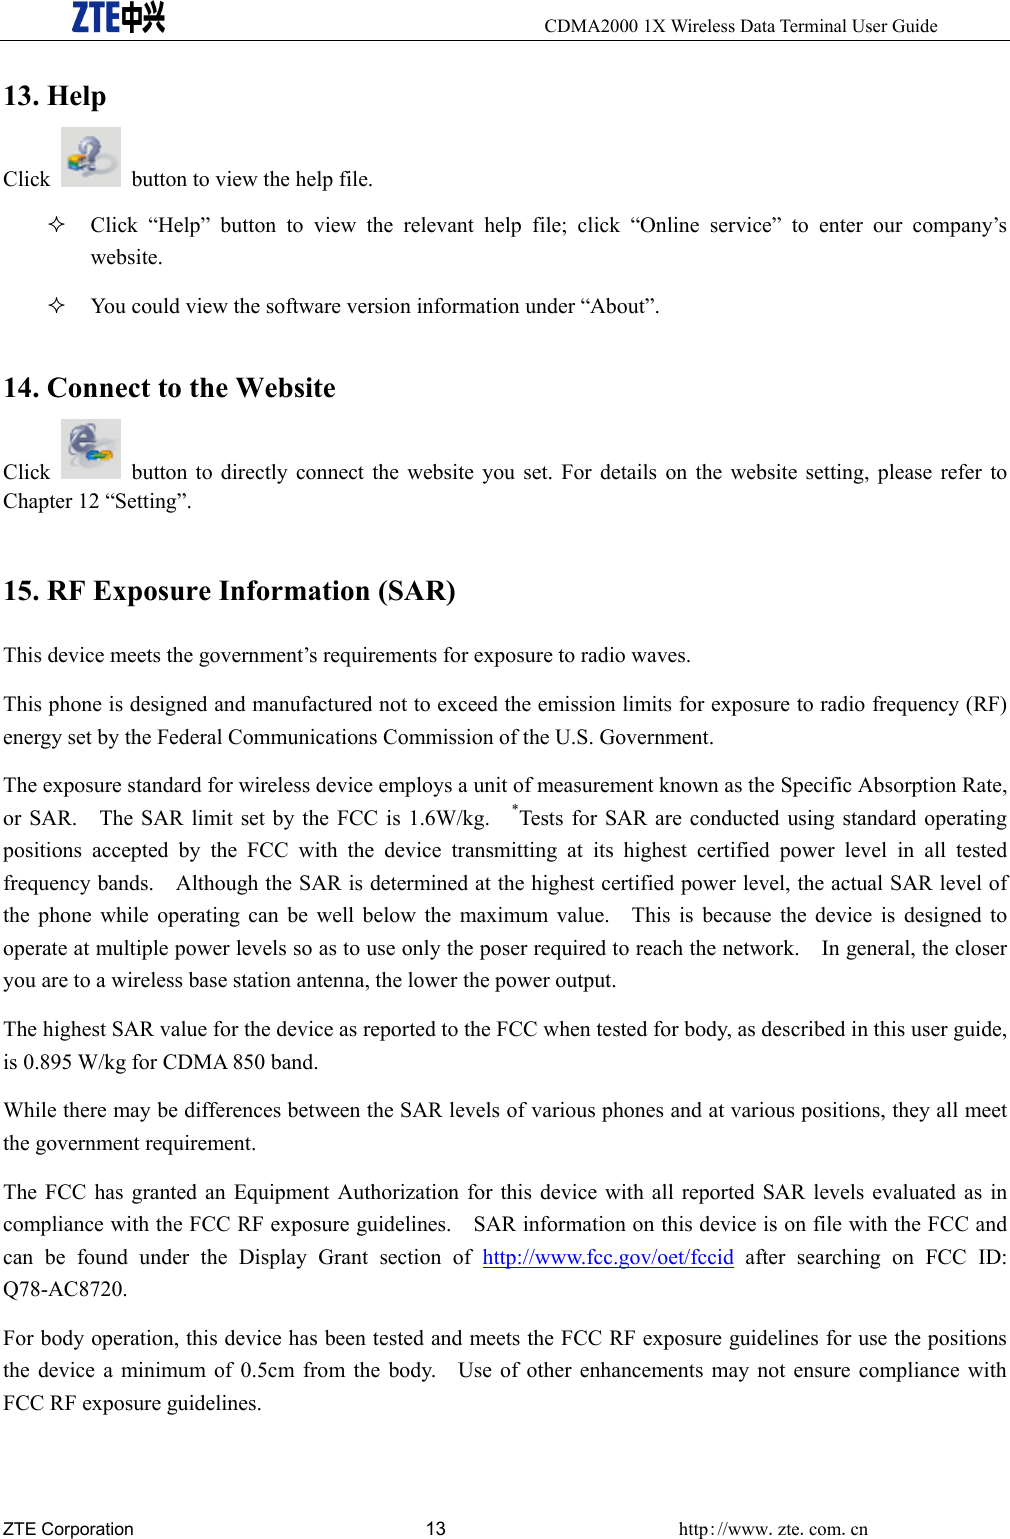     CDMA2000 1X Wireless Data Terminal User Guide ZTE Corporation 13 http://www.zte.com.cn  13. Help Click    button to view the help file.  Click “Help” button to view the relevant help file; click “Online service” to enter our company’s website.  You could view the software version information under “About”. 14. Connect to the Website Click    button to directly connect the website you set. For details on the website setting, please refer to Chapter 12 “Setting”. 15. RF Exposure Information (SAR)   This device meets the government’s requirements for exposure to radio waves. This phone is designed and manufactured not to exceed the emission limits for exposure to radio frequency (RF) energy set by the Federal Communications Commission of the U.S. Government.     The exposure standard for wireless device employs a unit of measurement known as the Specific Absorption Rate, or SAR.    The SAR limit set by the FCC is 1.6W/kg.    *Tests for SAR are conducted using standard operating positions accepted by the FCC with the device transmitting at its highest certified power level in all tested frequency bands.    Although the SAR is determined at the highest certified power level, the actual SAR level of the phone while operating can be well below the maximum value.   This is because the device is designed to operate at multiple power levels so as to use only the poser required to reach the network.    In general, the closer you are to a wireless base station antenna, the lower the power output. The highest SAR value for the device as reported to the FCC when tested for body, as described in this user guide, is 0.895 W/kg for CDMA 850 band. While there may be differences between the SAR levels of various phones and at various positions, they all meet the government requirement. The FCC has granted an Equipment Authorization for this device with all reported SAR levels evaluated as in compliance with the FCC RF exposure guidelines.    SAR information on this device is on file with the FCC and can be found under the Display Grant section of http://www.fcc.gov/oet/fccid after searching on FCC ID: Q78-AC8720. For body operation, this device has been tested and meets the FCC RF exposure guidelines for use the positions the device a minimum of 0.5cm from the body.    Use of other enhancements may not ensure compliance with FCC RF exposure guidelines. 